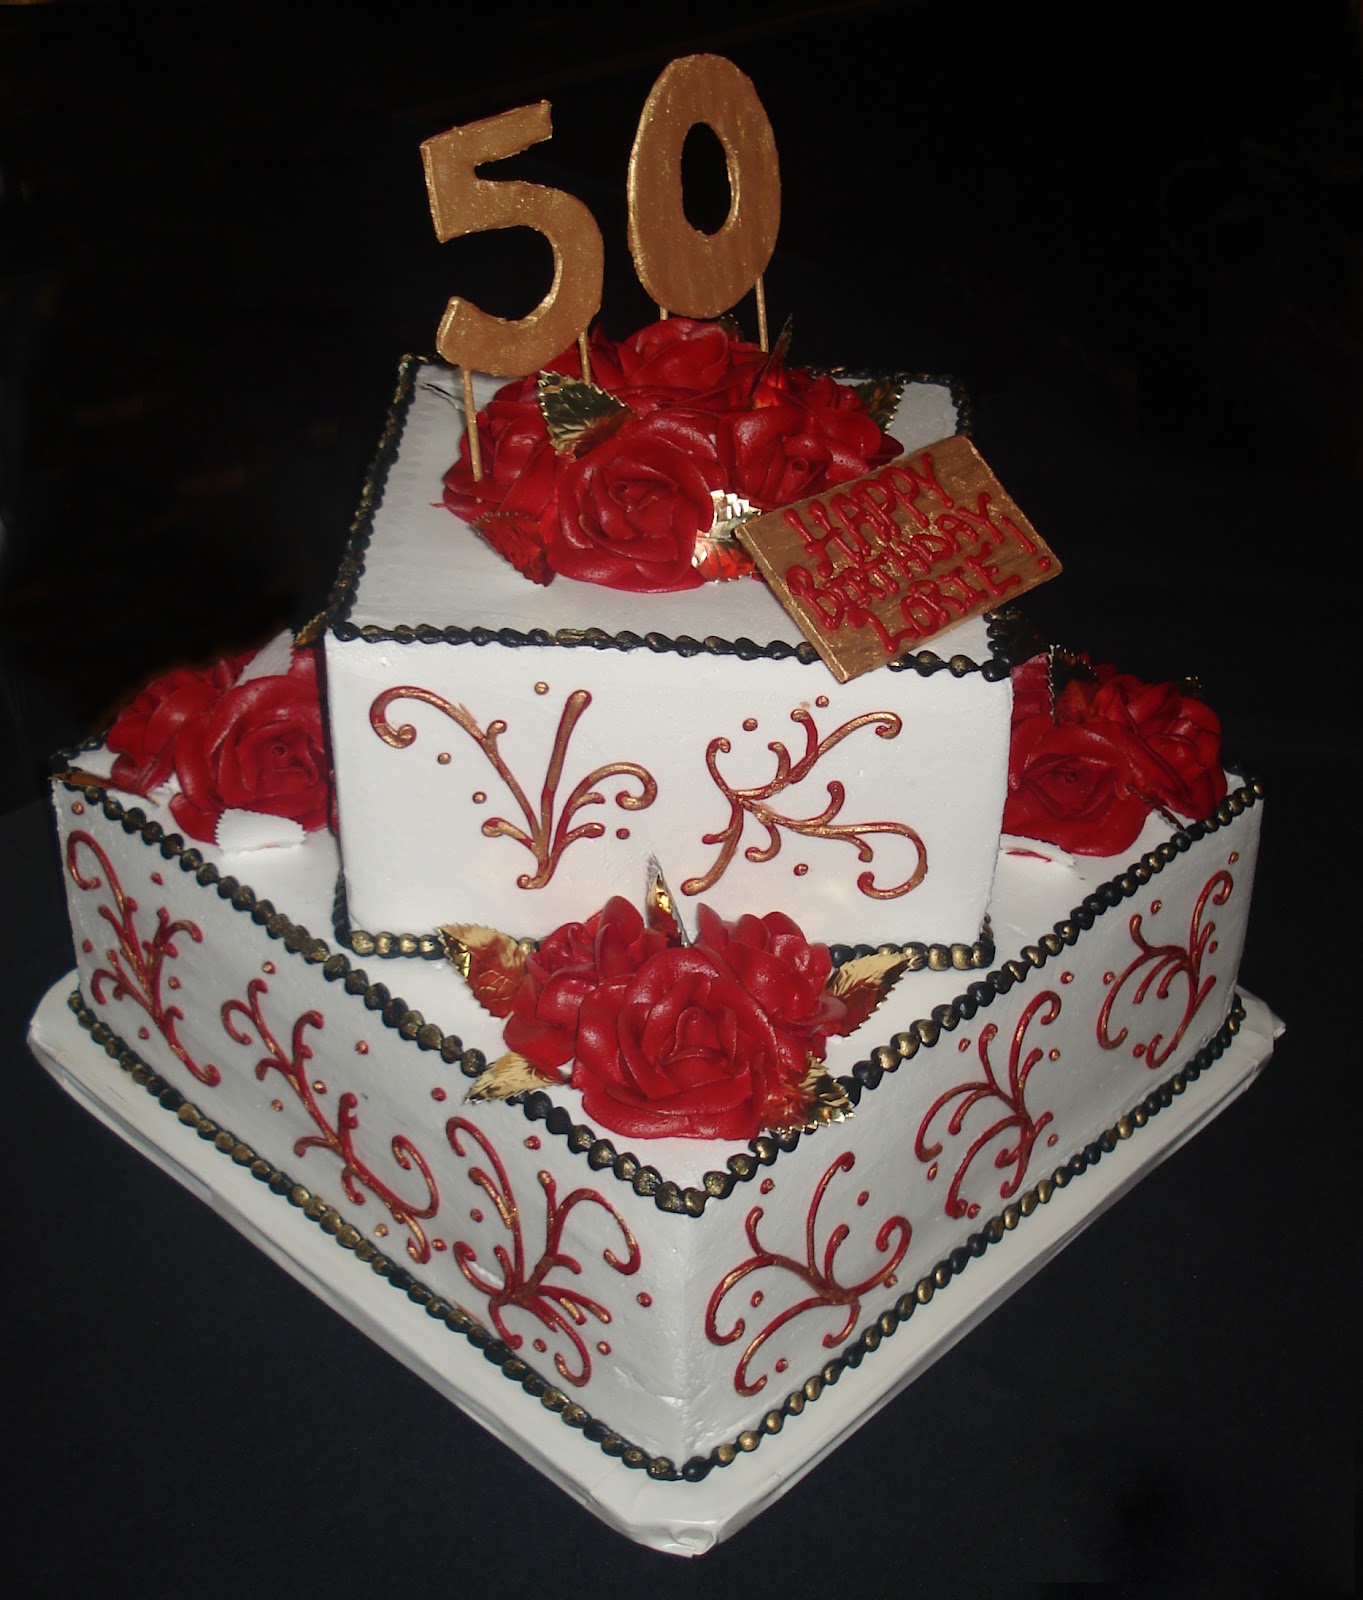 Birthday Cakes for 50 Year Olds